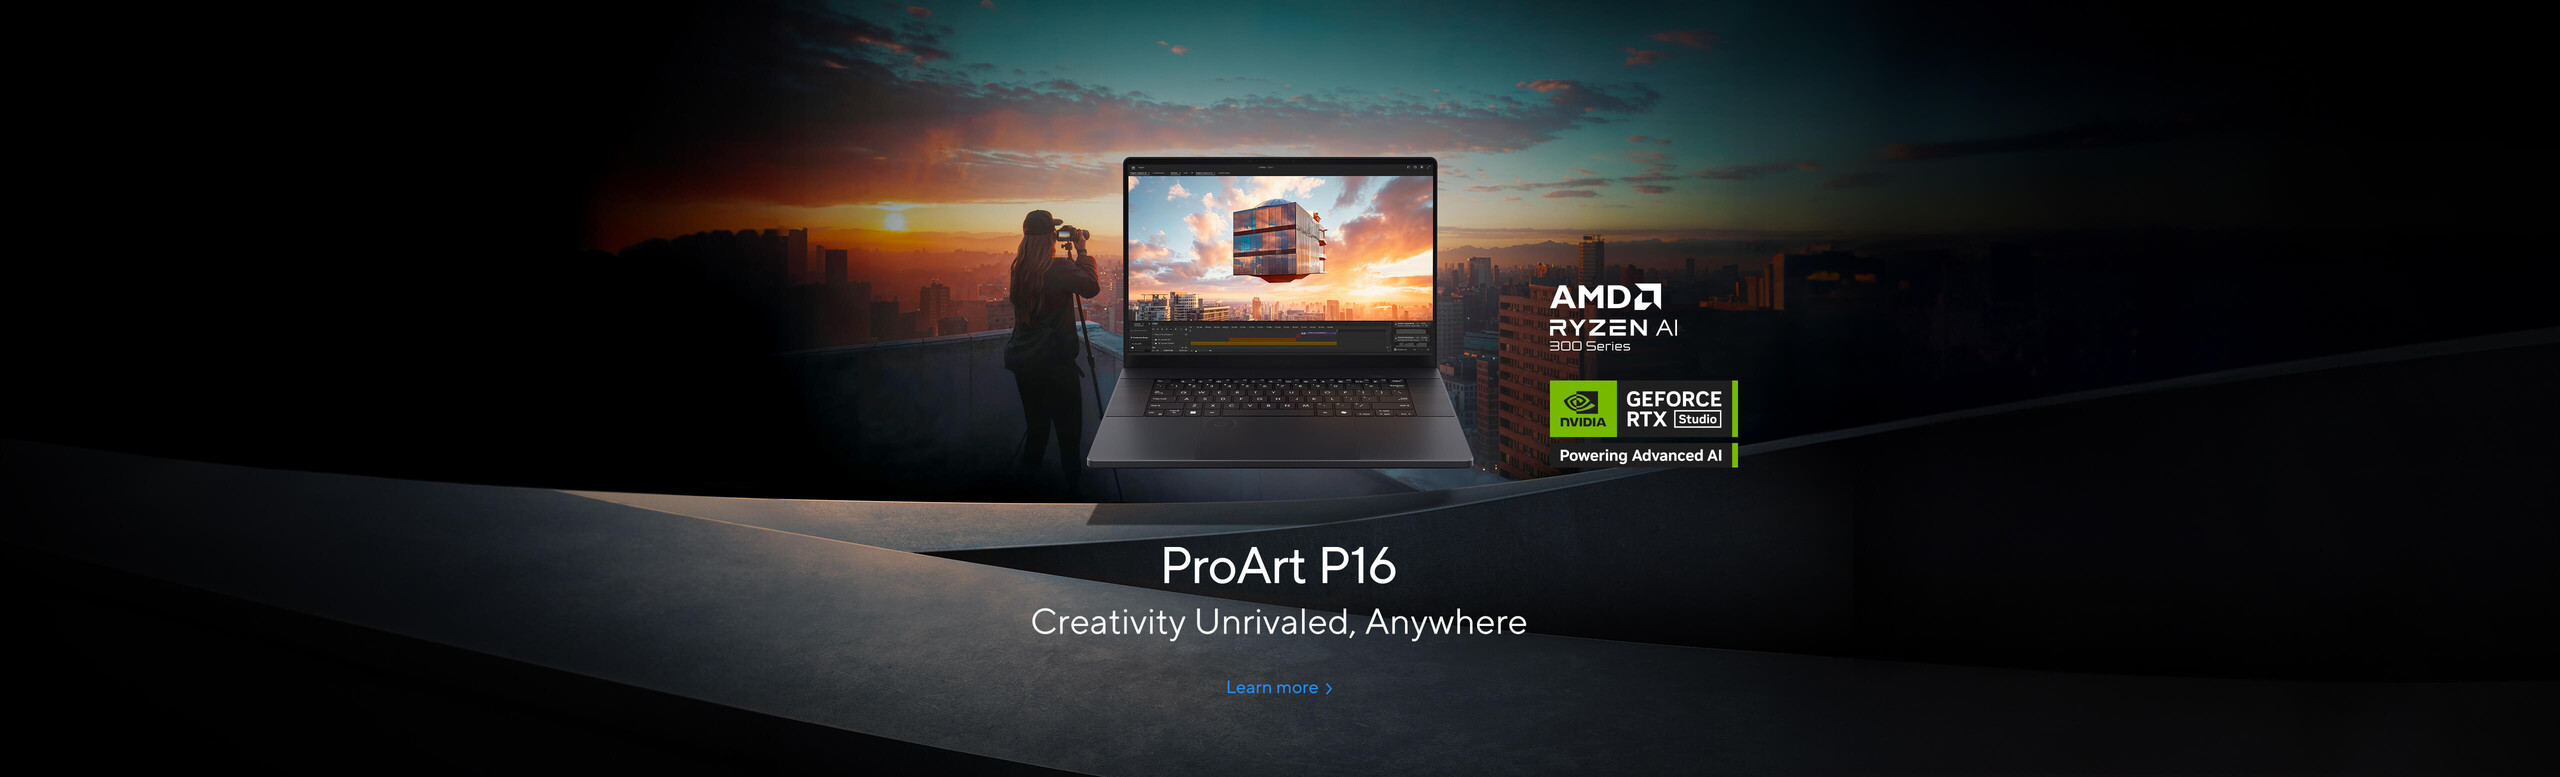 Image of a ProArt P16.  Creativity Unrivaled, Anywhere.  Learn more